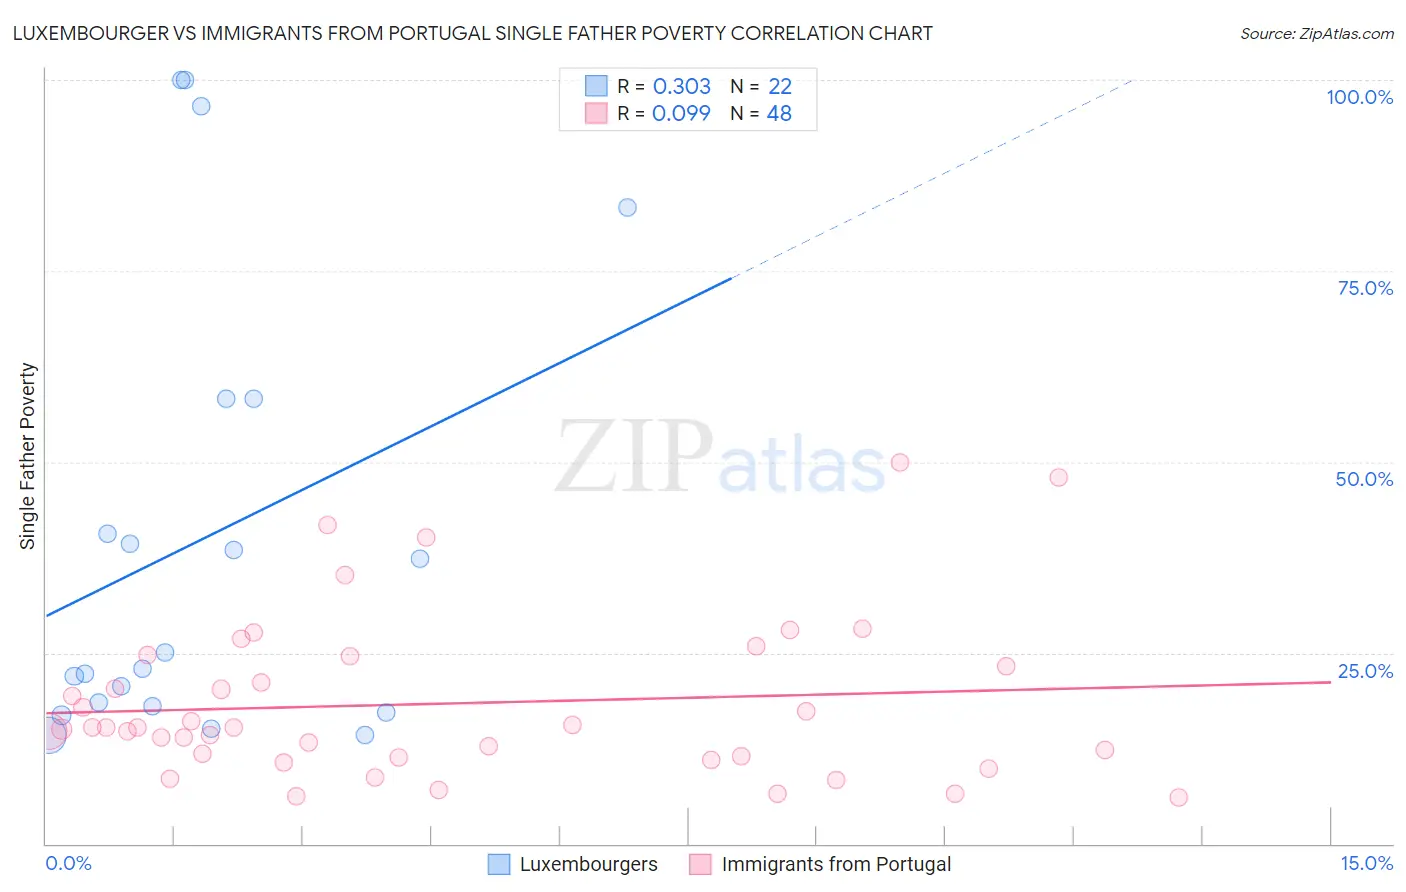 Luxembourger vs Immigrants from Portugal Single Father Poverty